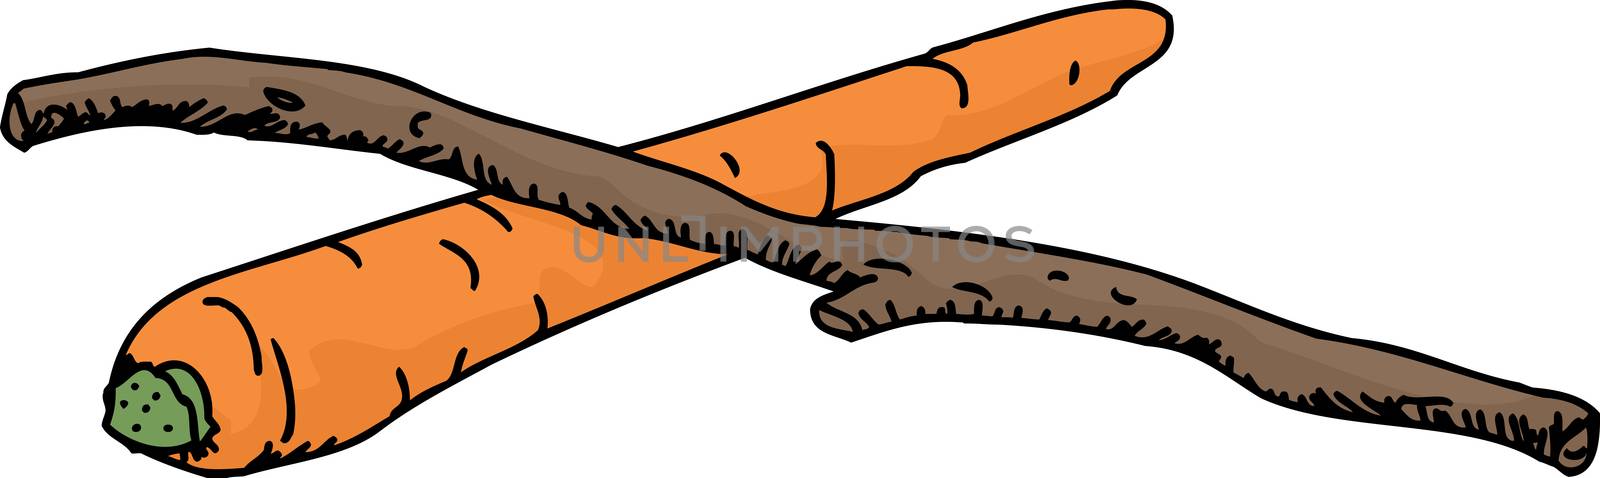 Isolated sketch of carrot and stick over white background